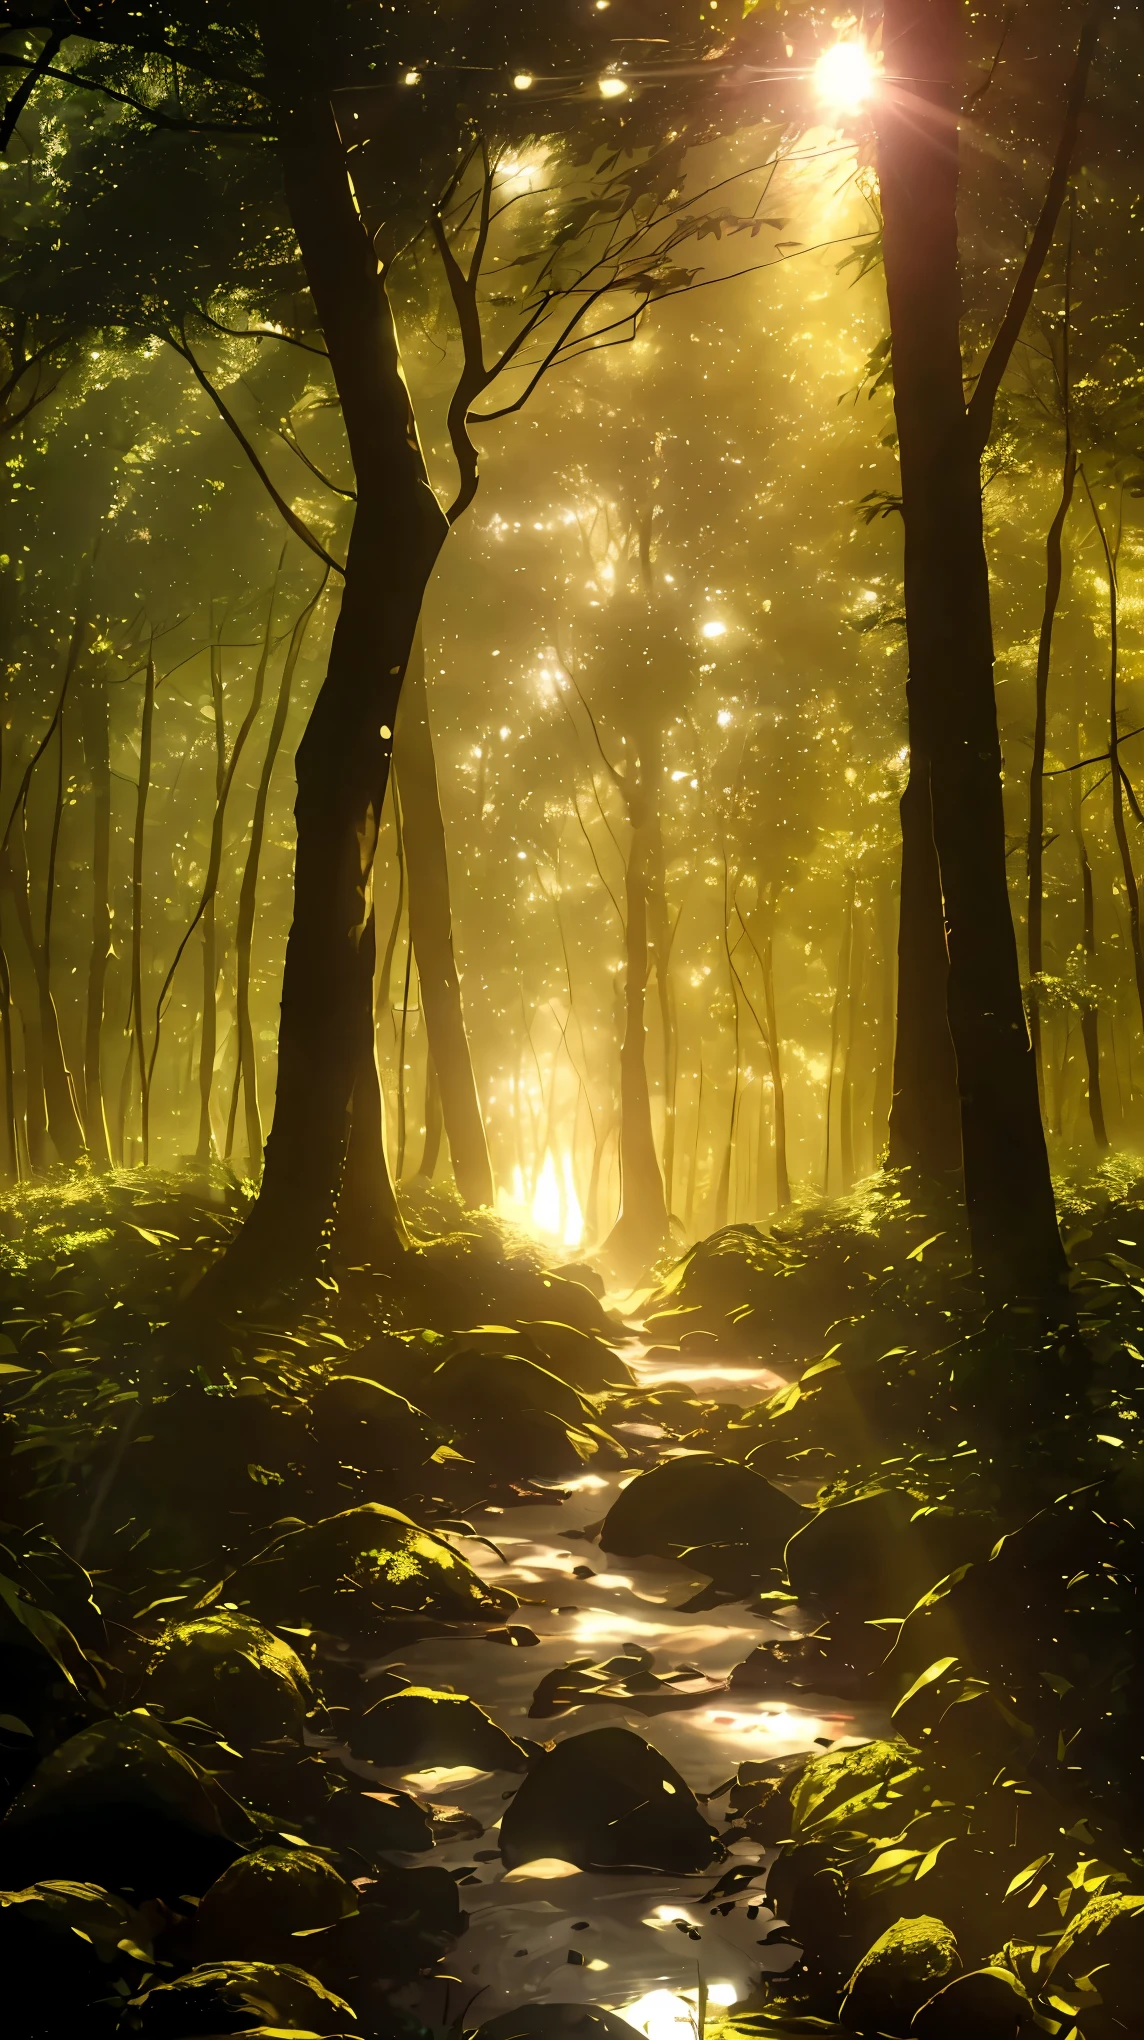  This photograph captures the ethereal beauty of a forest under the light, showcasing the Tyndall effect. As the sun shines through the trees, water vapor creates a mystical atmosphere. The distant glow adds to the intrigue of this enchanted forest, making it a perfect setting for exploration and adventure.